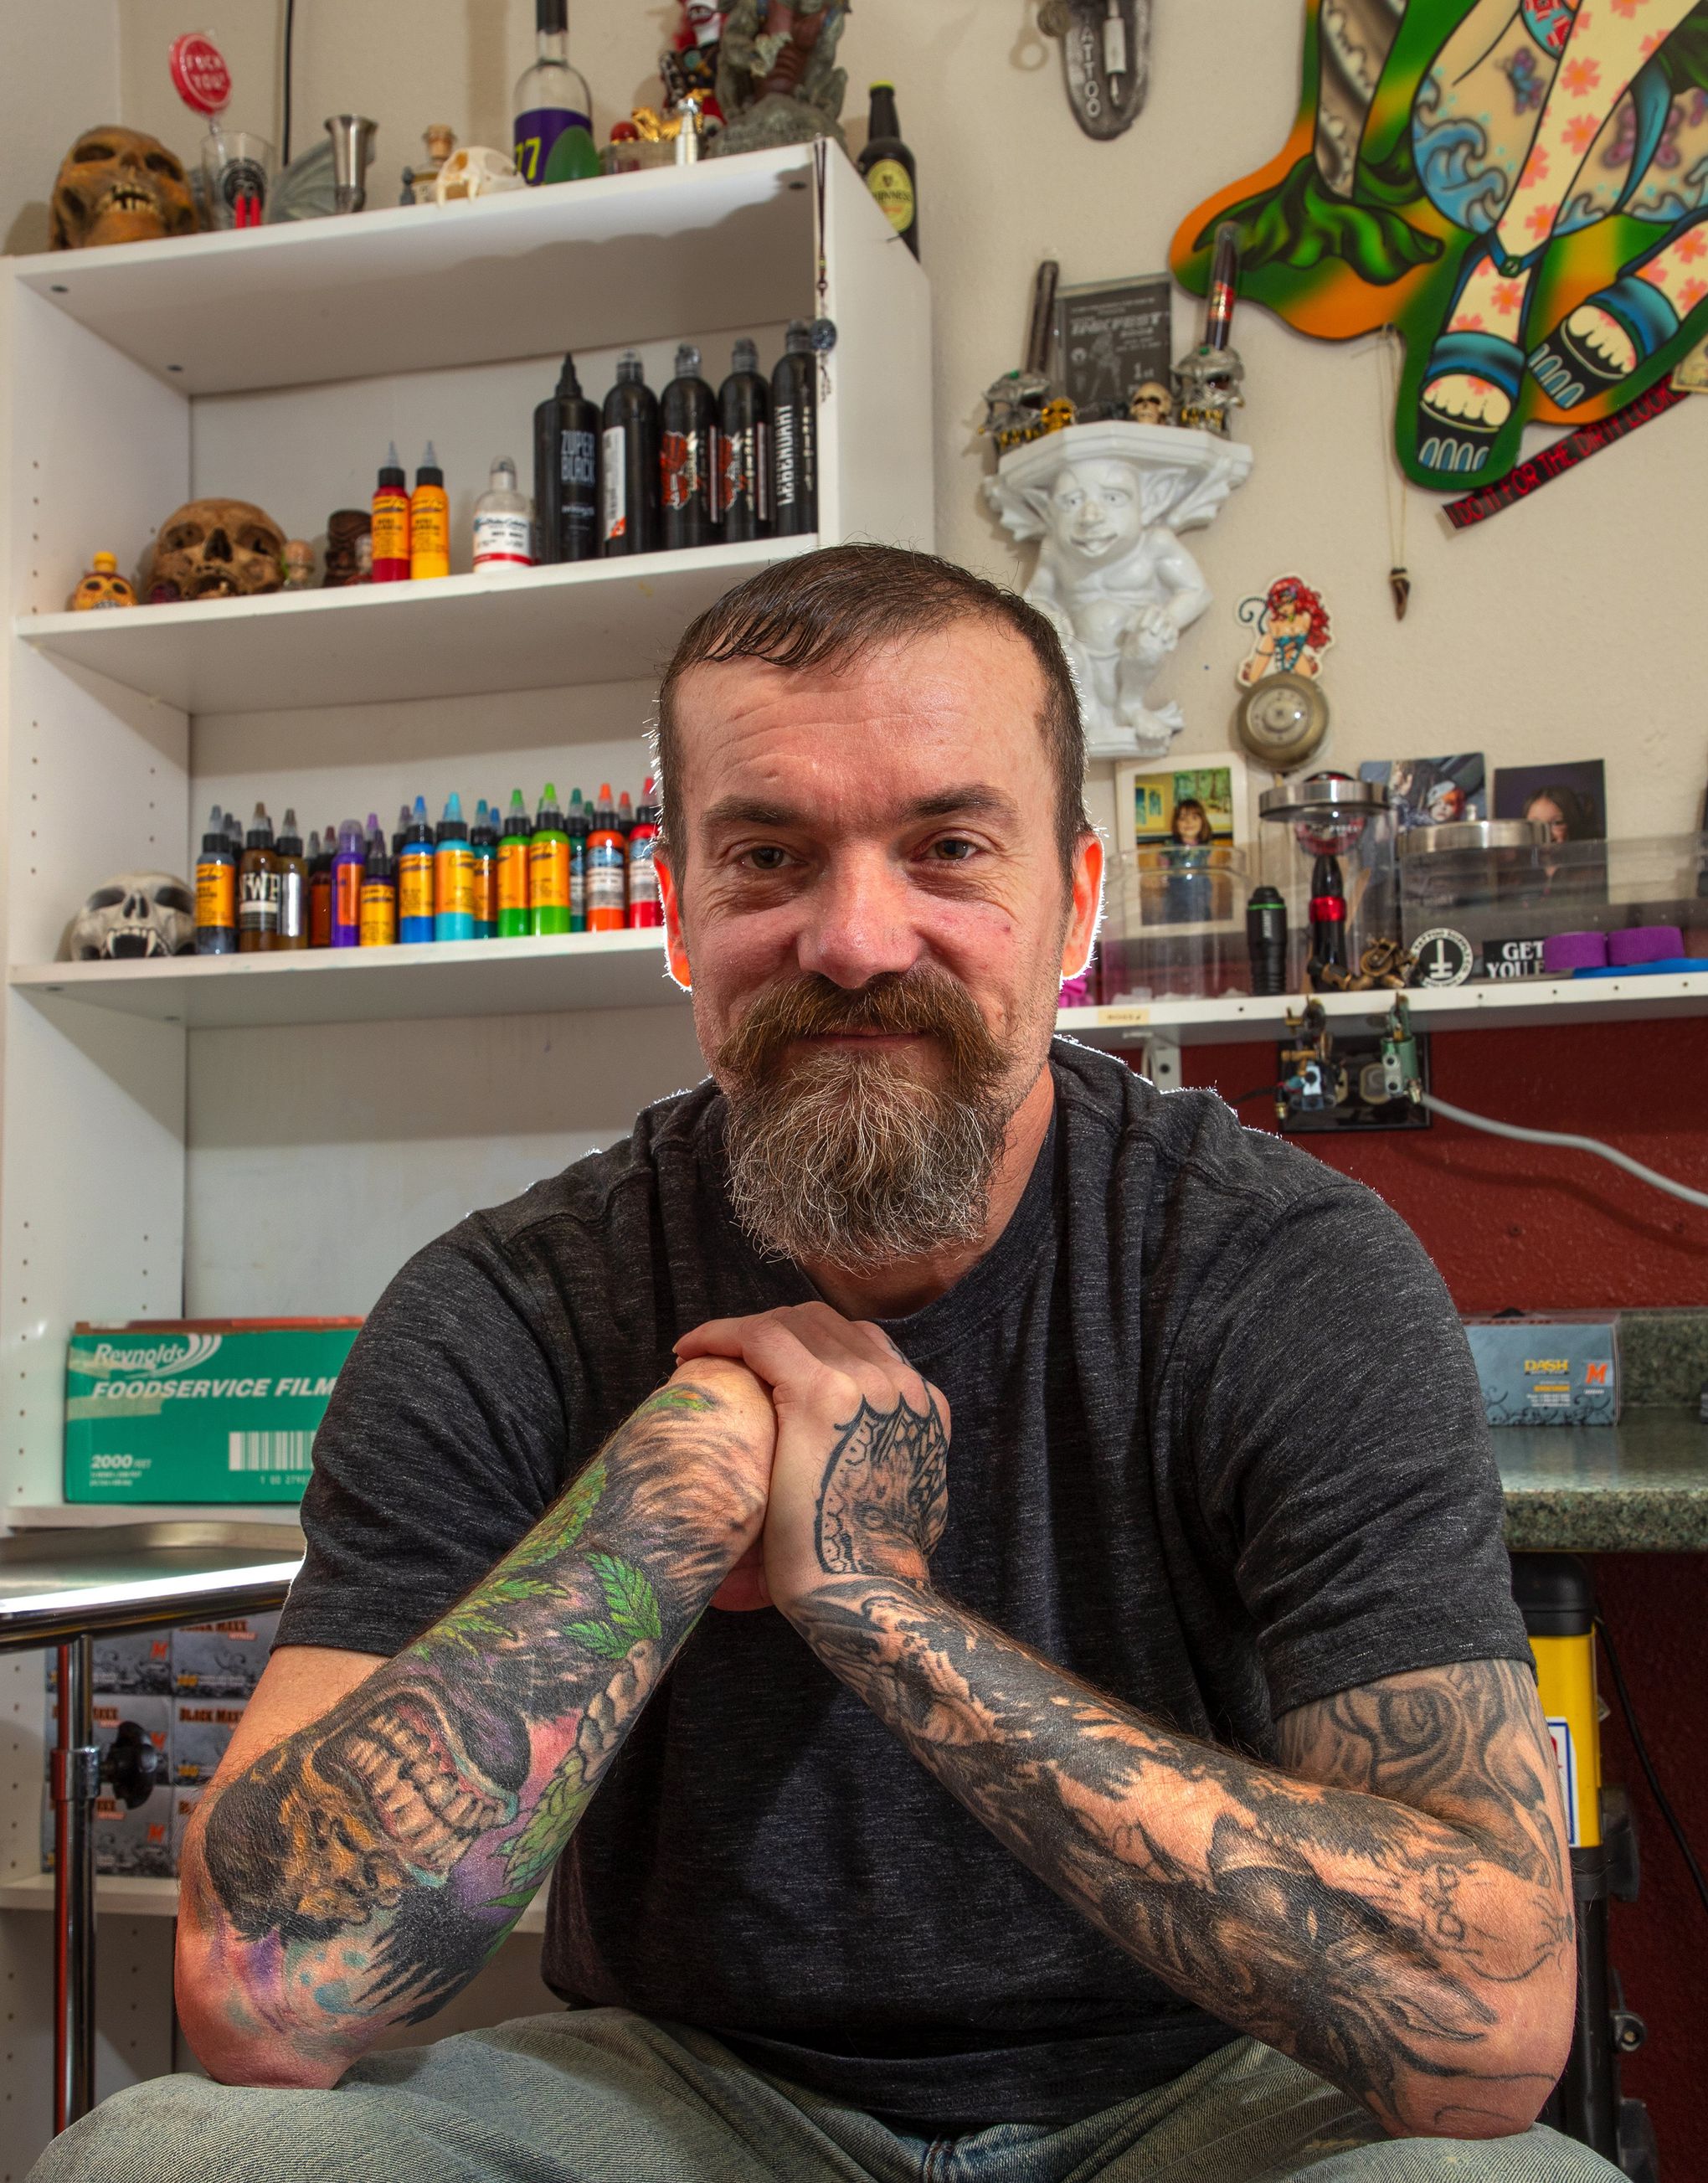 Former tattoo artist who gave live brain tissue to science during